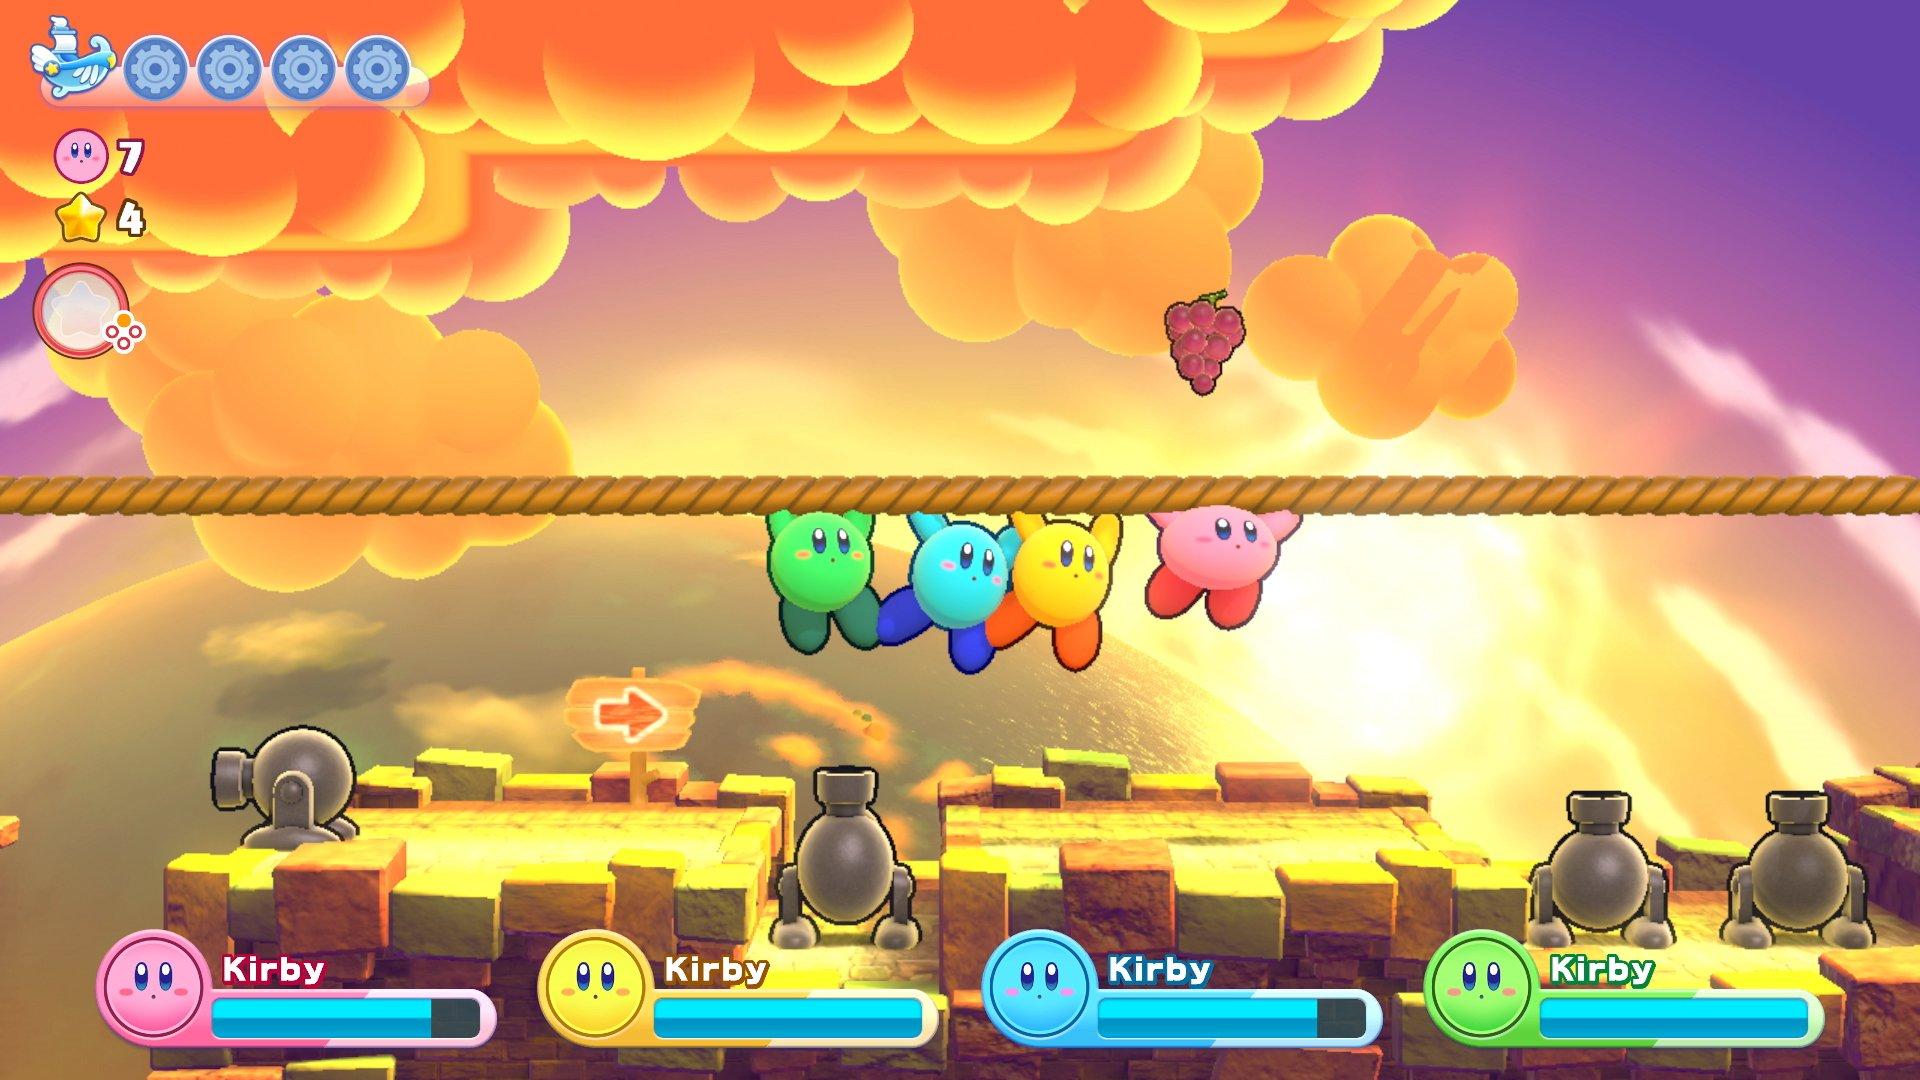 Kirby's Return to Dream Land Deluxe is a Switch game for all ages